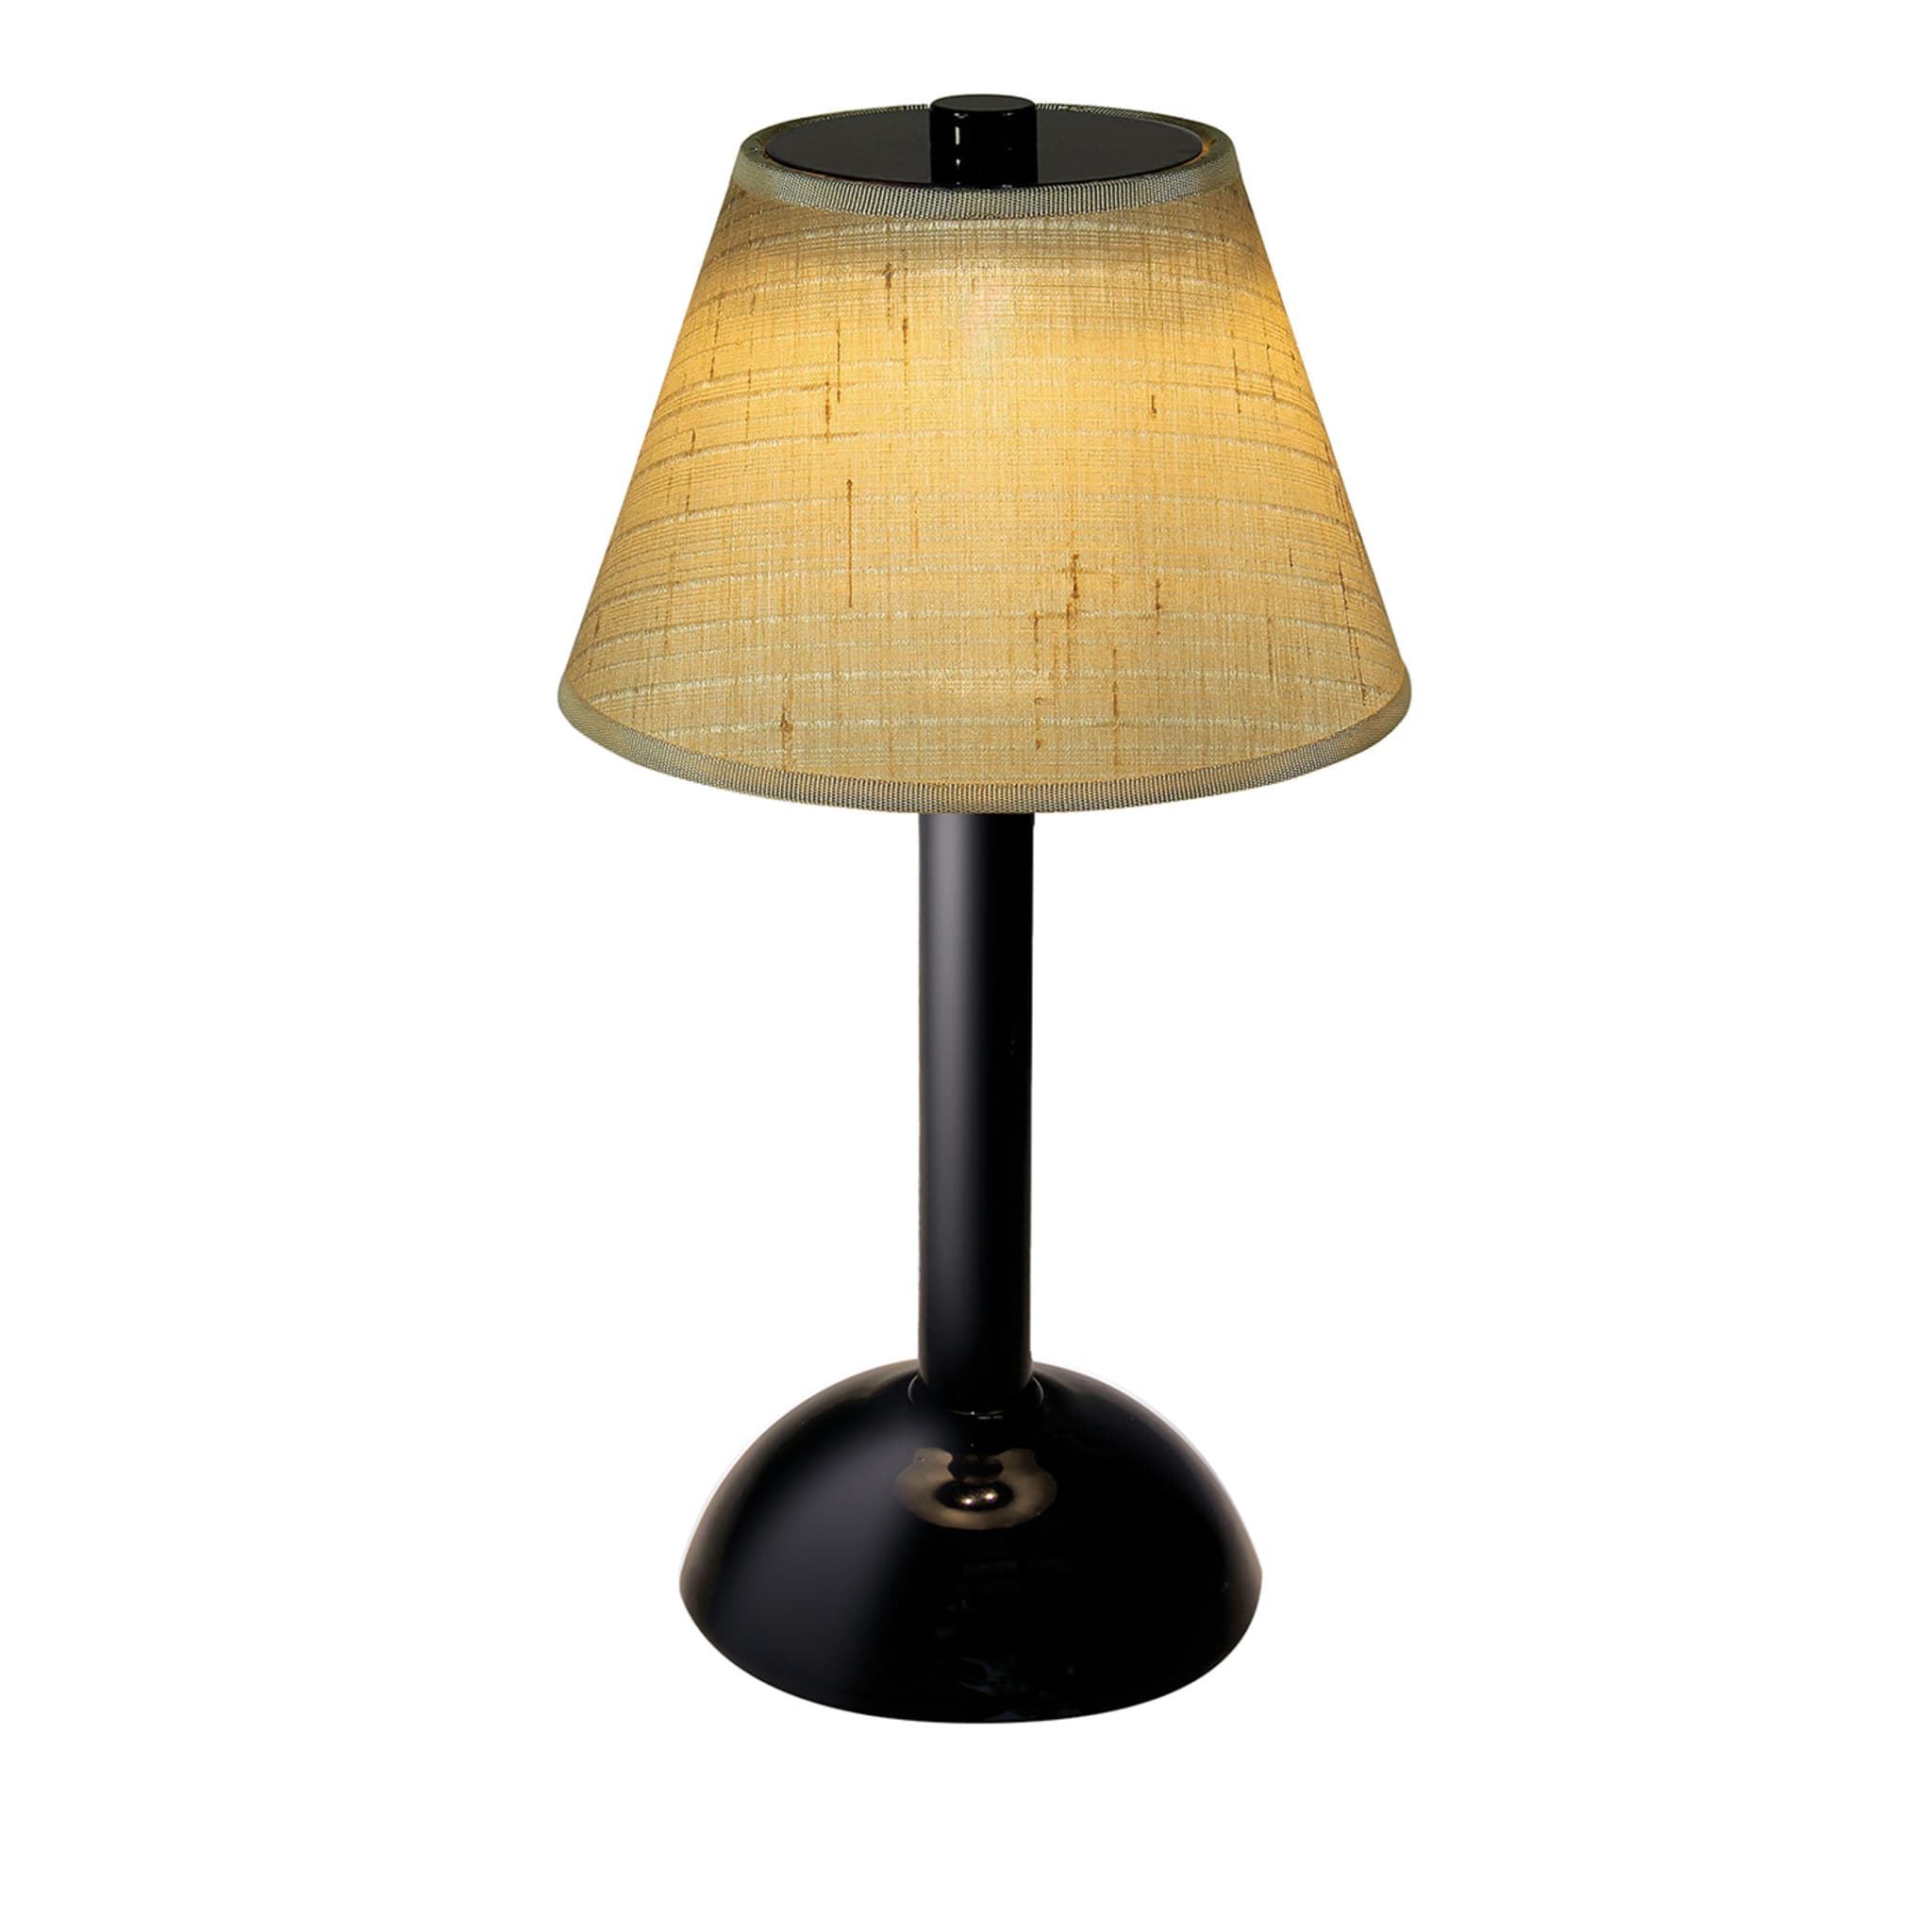 Moon Soria Avorio Black Table Lamp by Stefano Tabarin - Main view